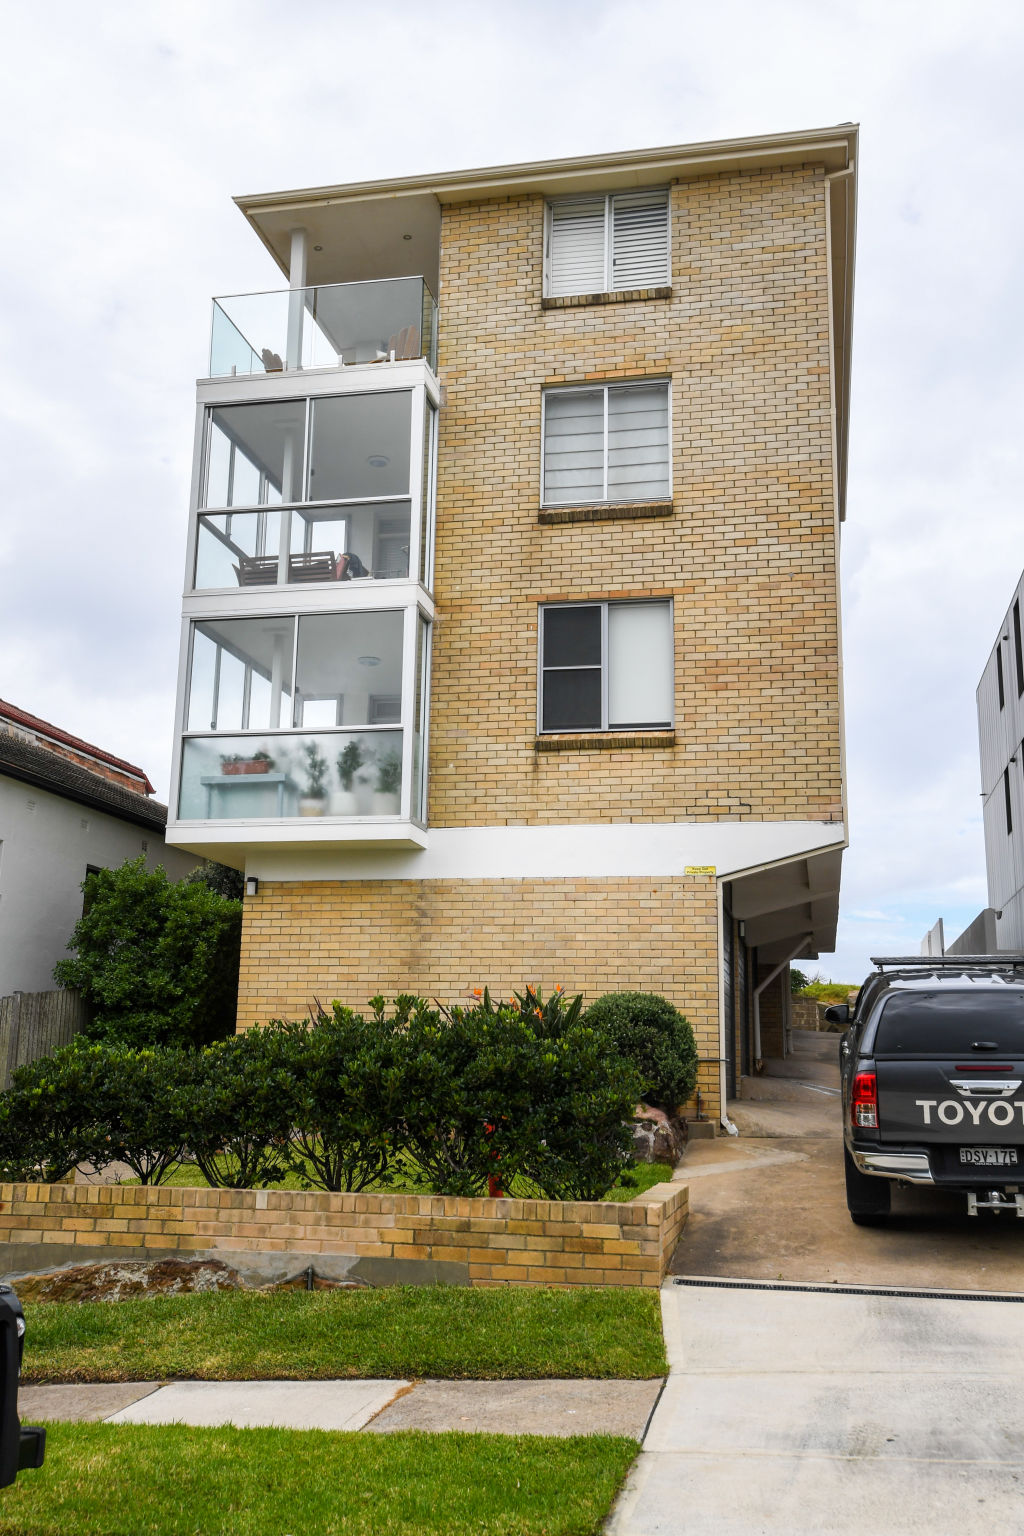 Australia's youngest billionaire buys entire block of flats next door for own use